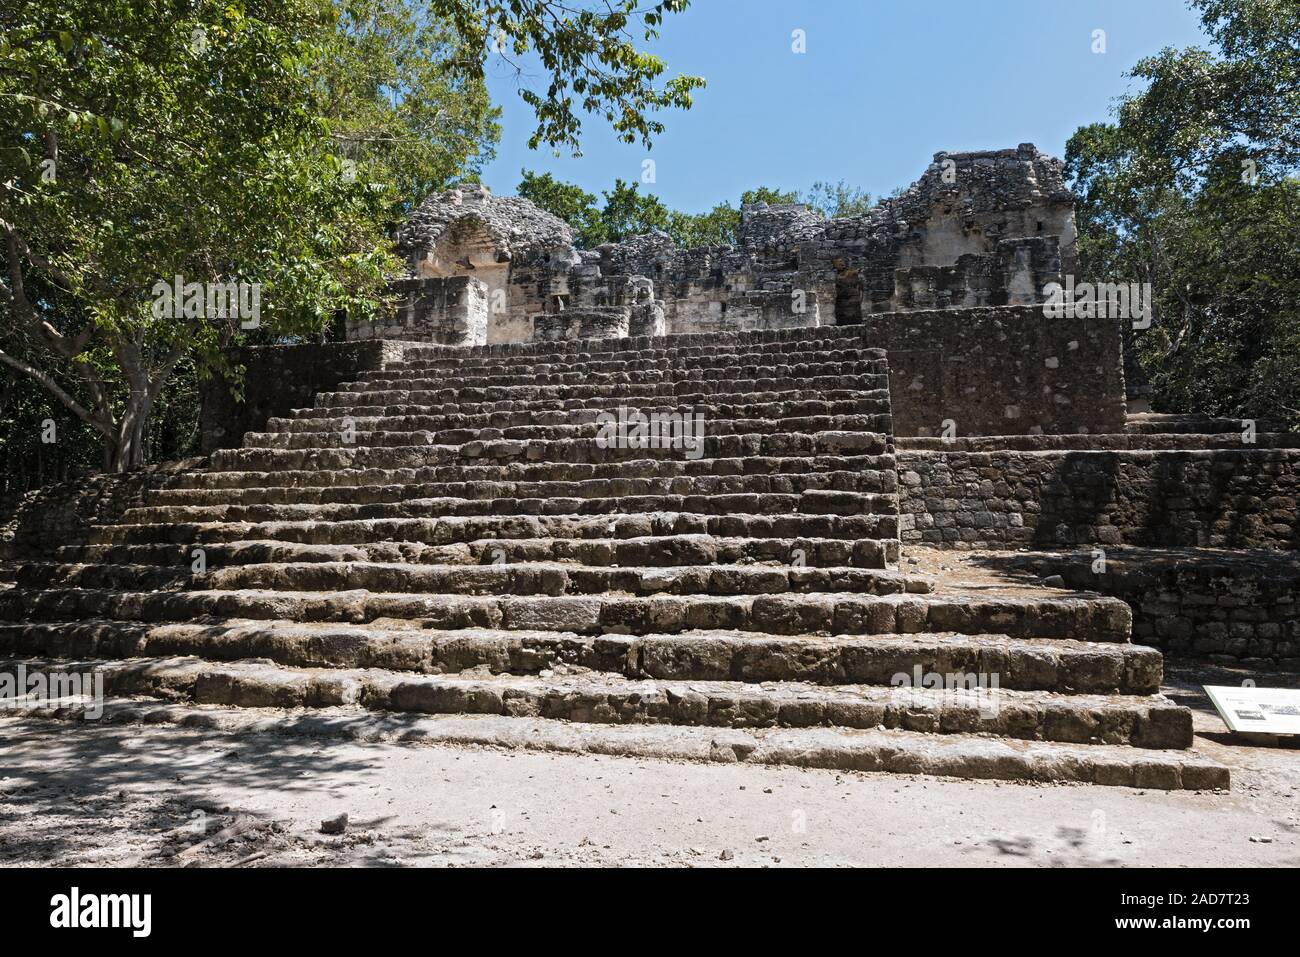 The ruins of the ancient Mayan city of calakmul, campeche, Mexico Stock Photo